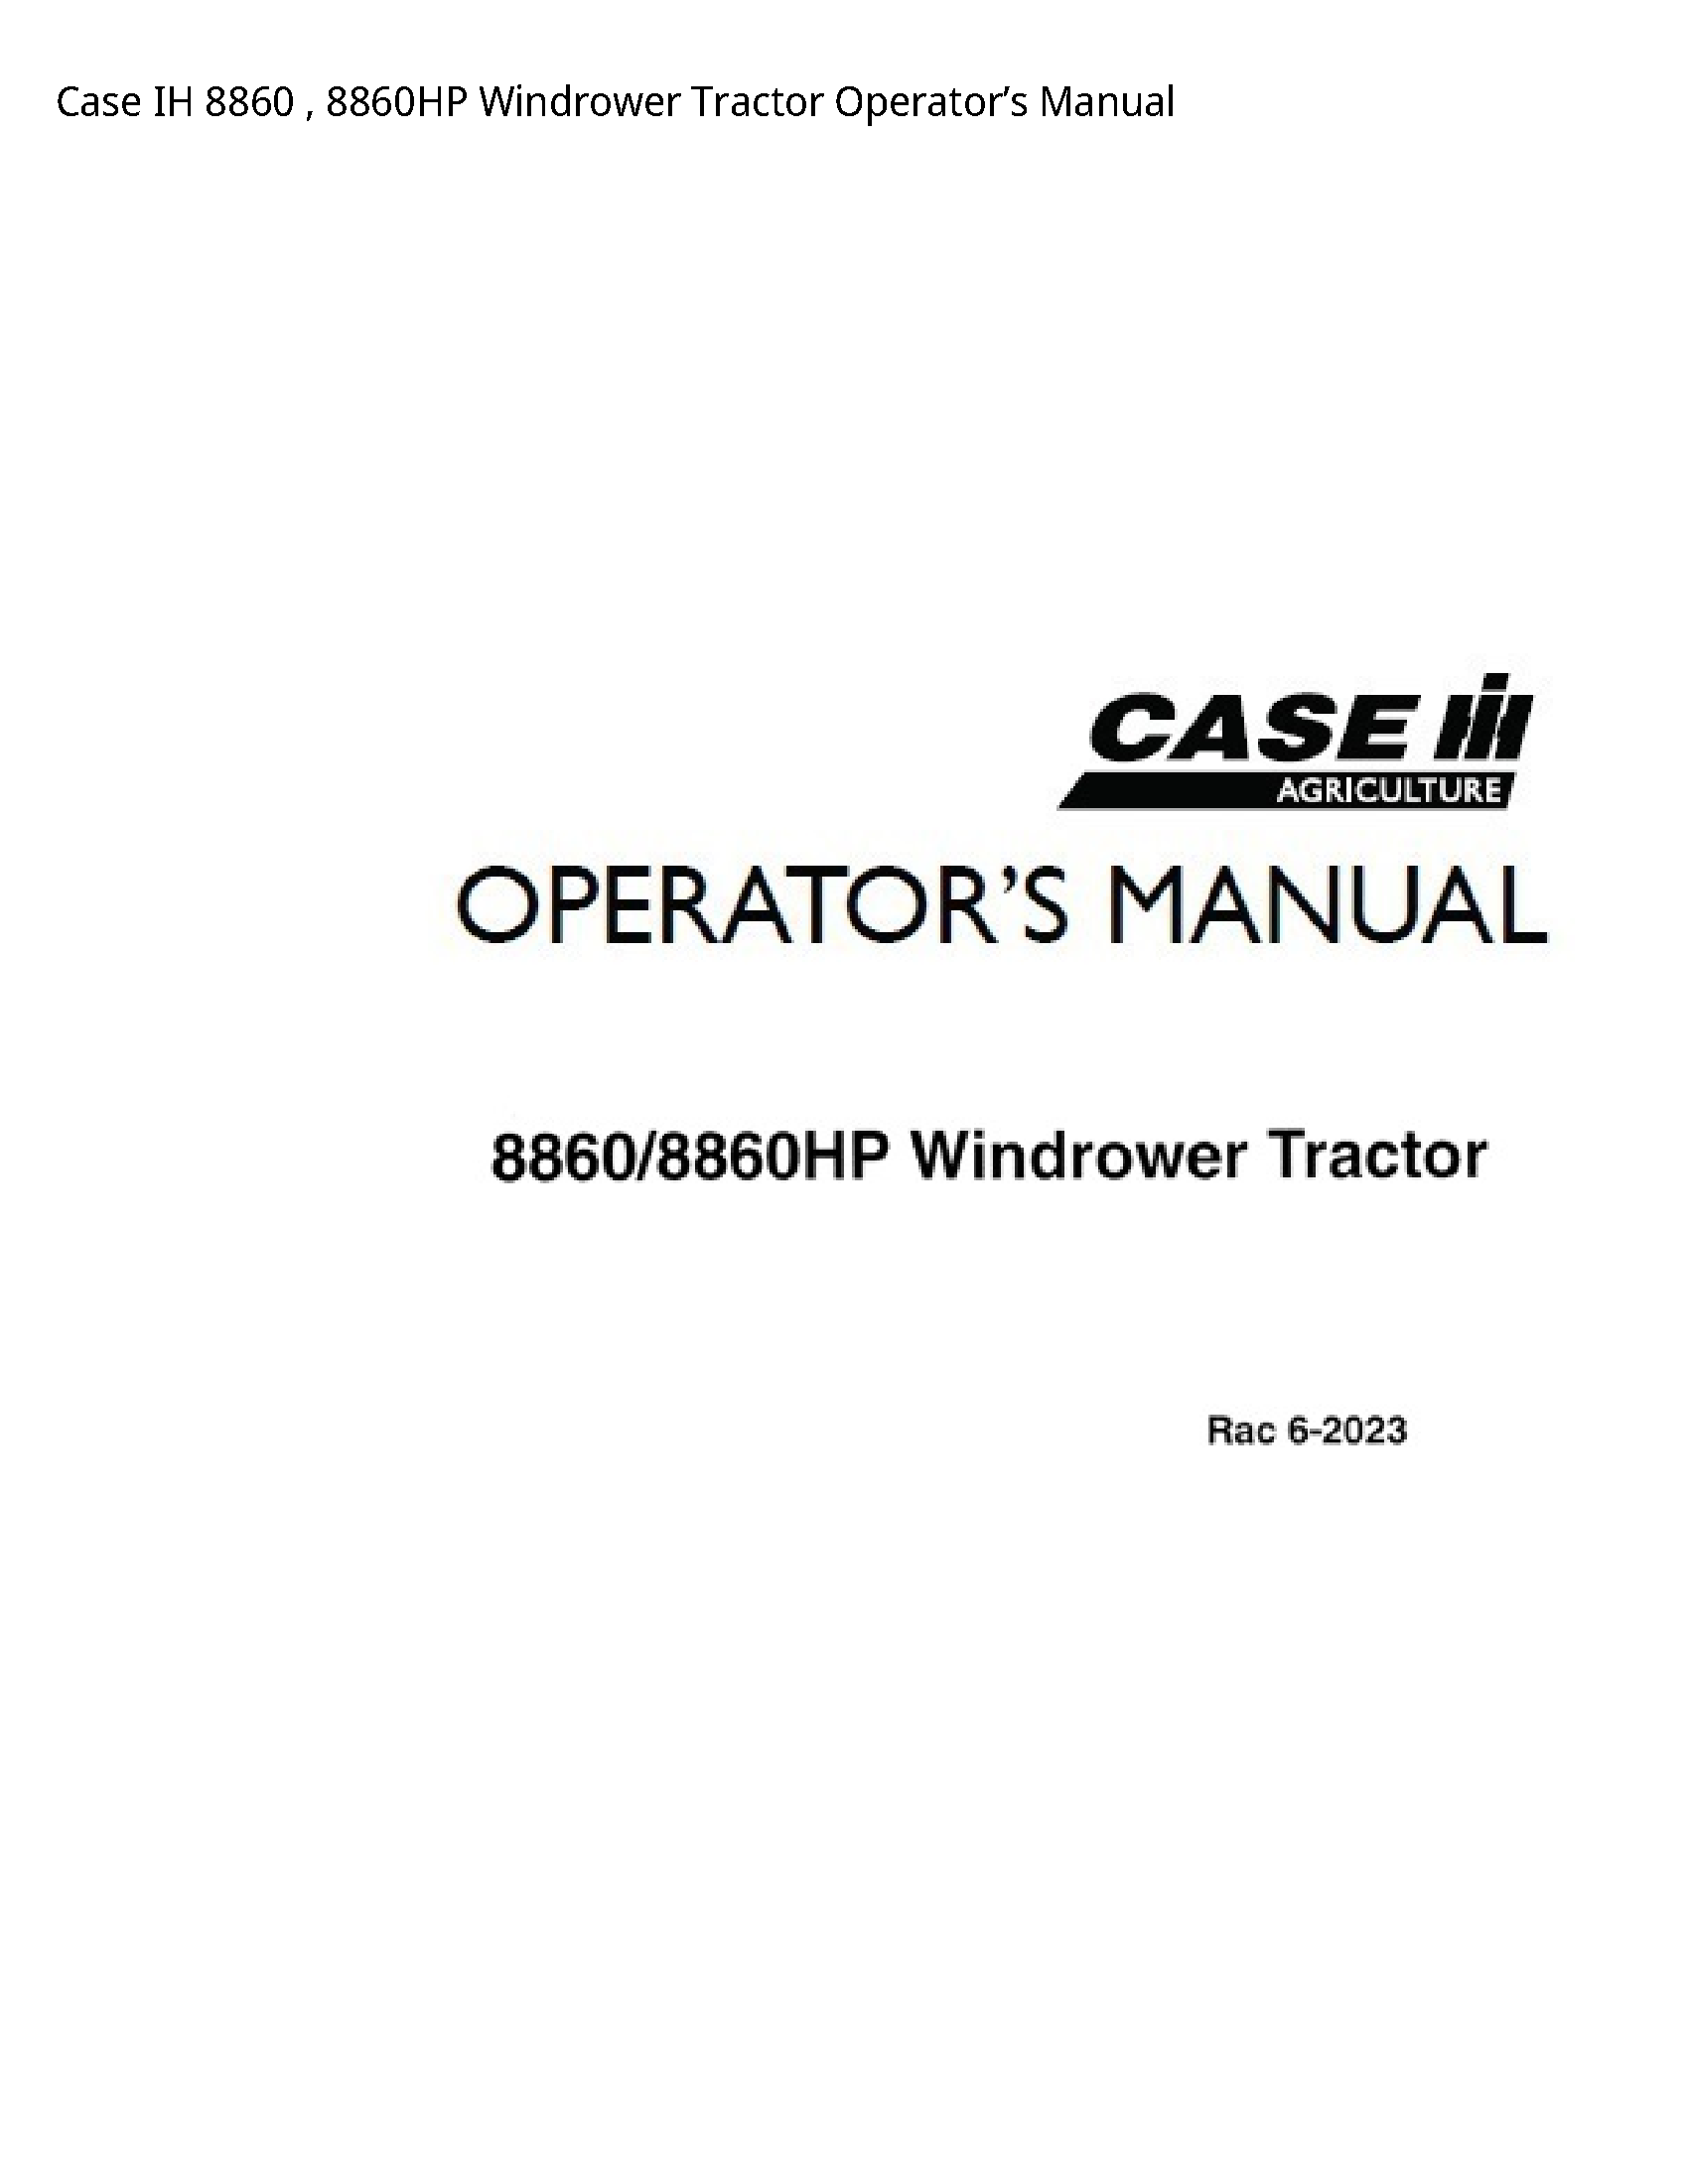 Case/Case IH 8860 IH Windrower Tractor Operator’s manual